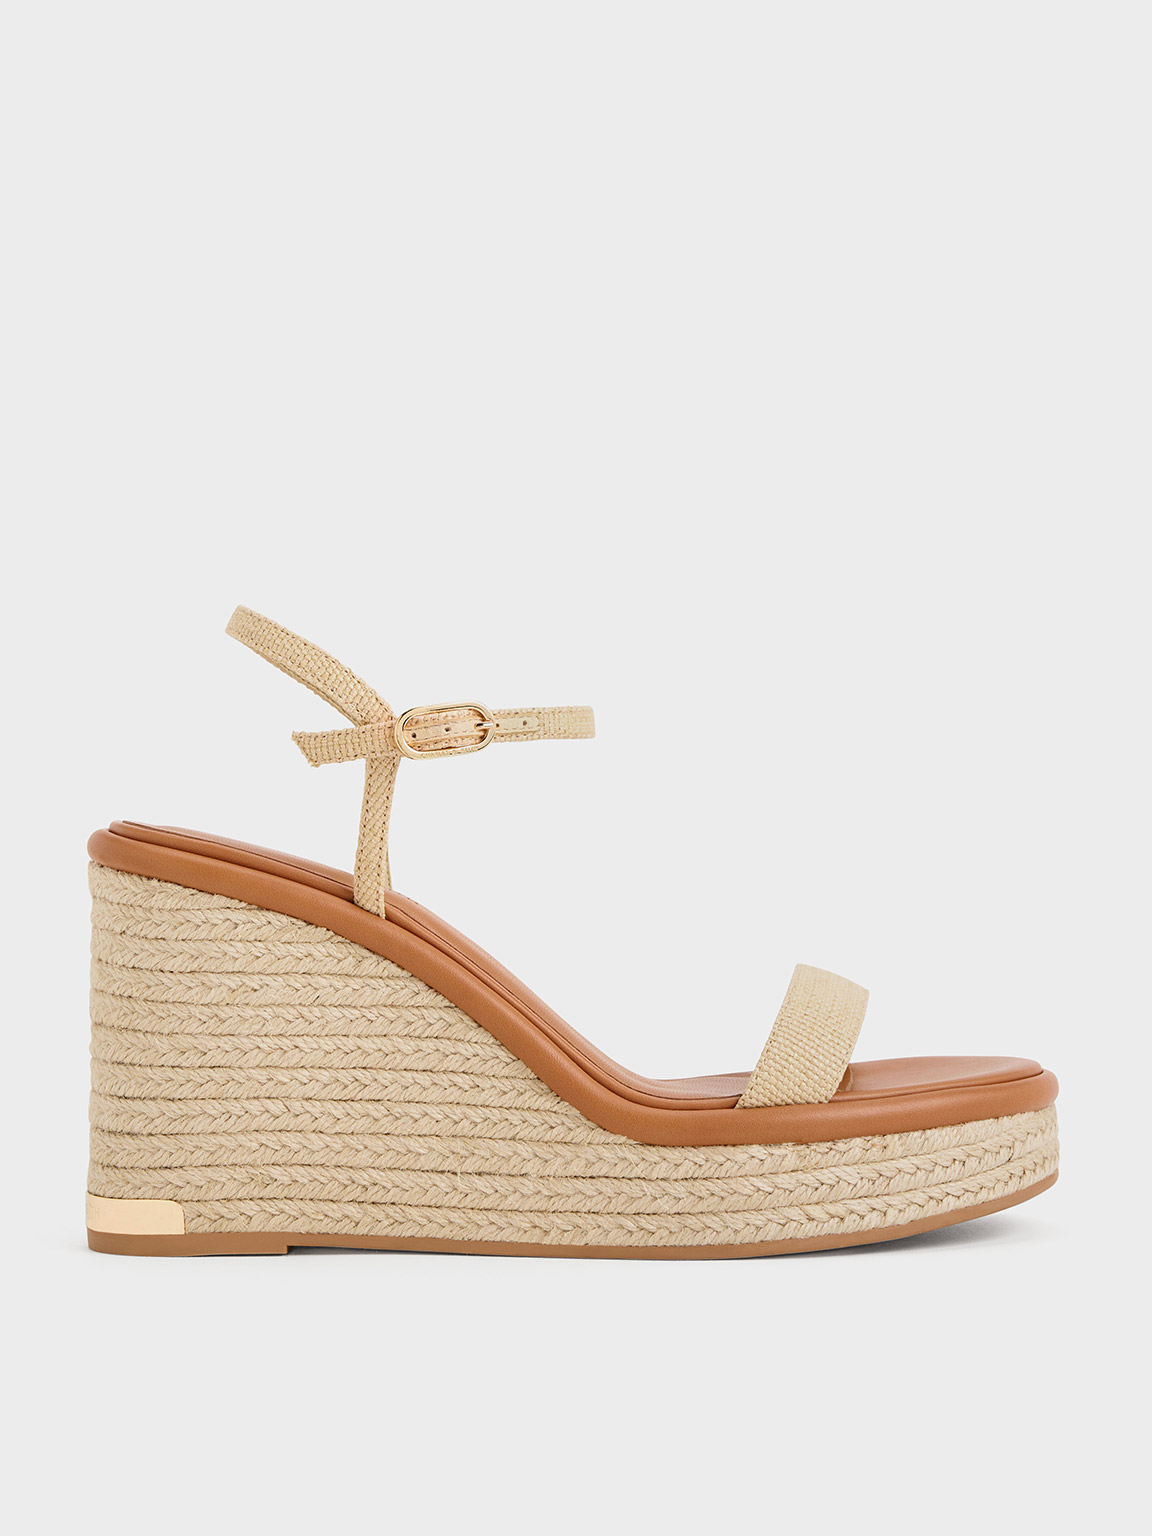 Charles & Keith Woven Espadrille Wedges In Sand